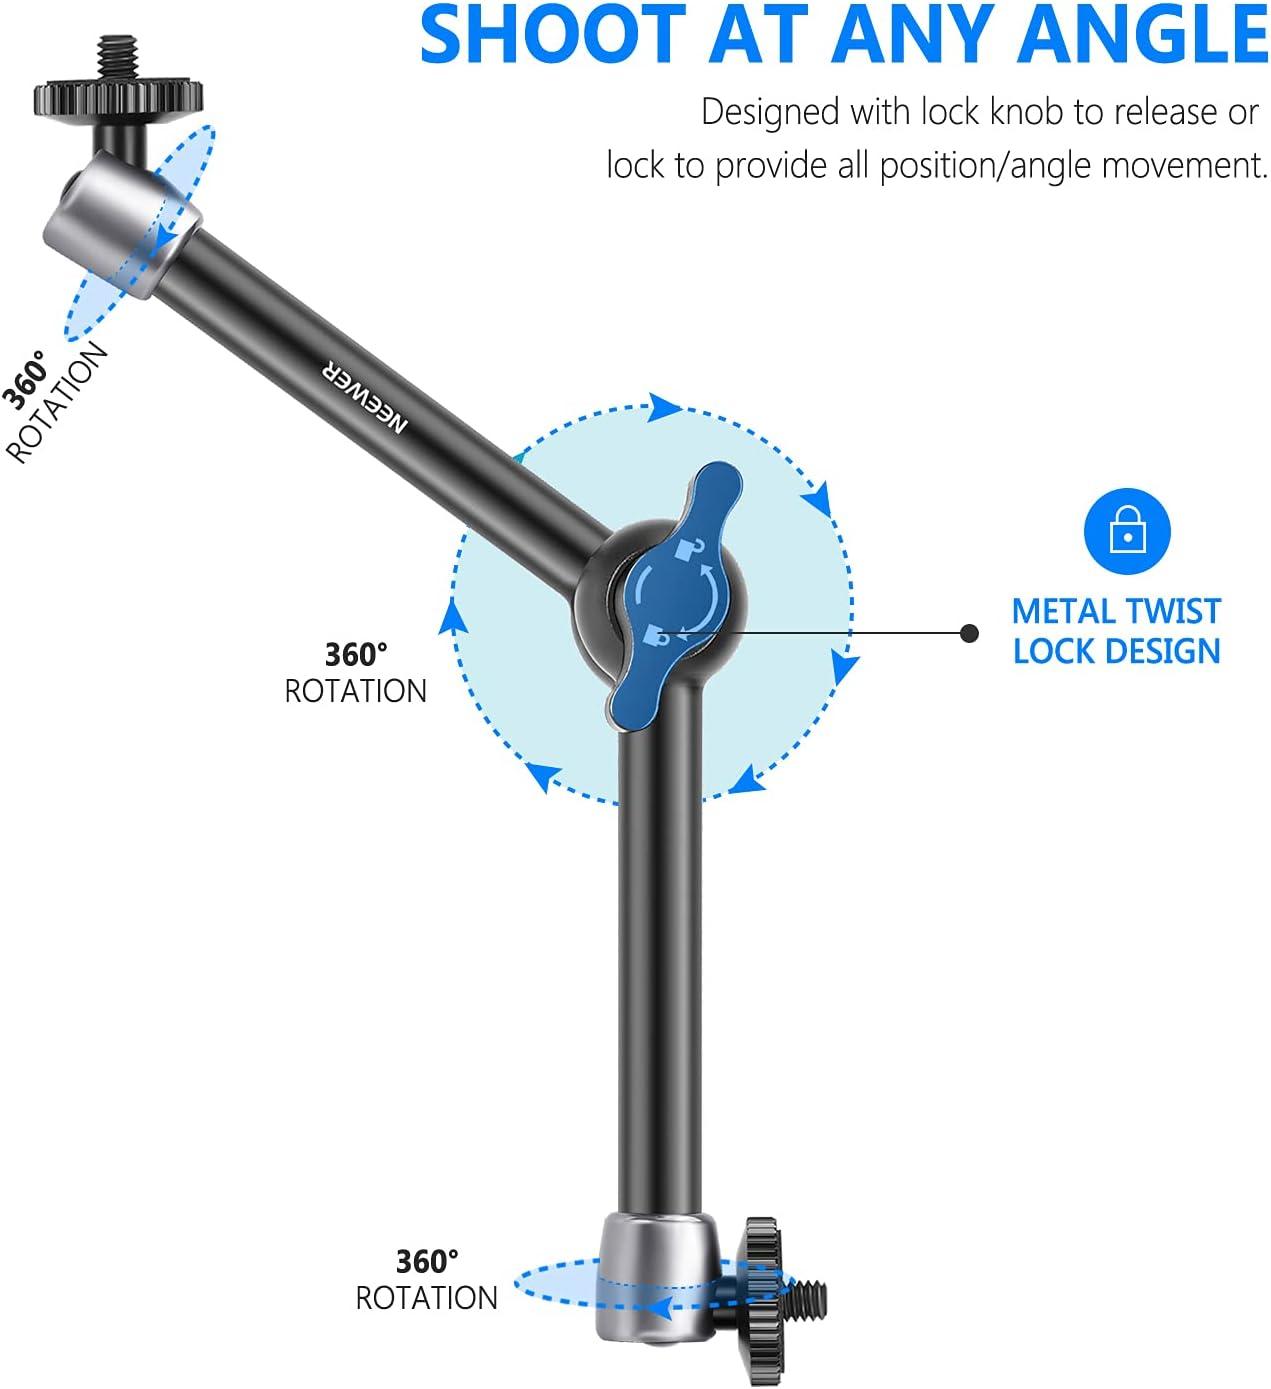 Neewer 9.8in/25cm Adjustable Friction Magic Arm with Both 1/4-inch Thread  Screw, for Flash, LED Light, Microphone, Monitor,Super Clamp, Load up to  4.4lb/2kg ST25